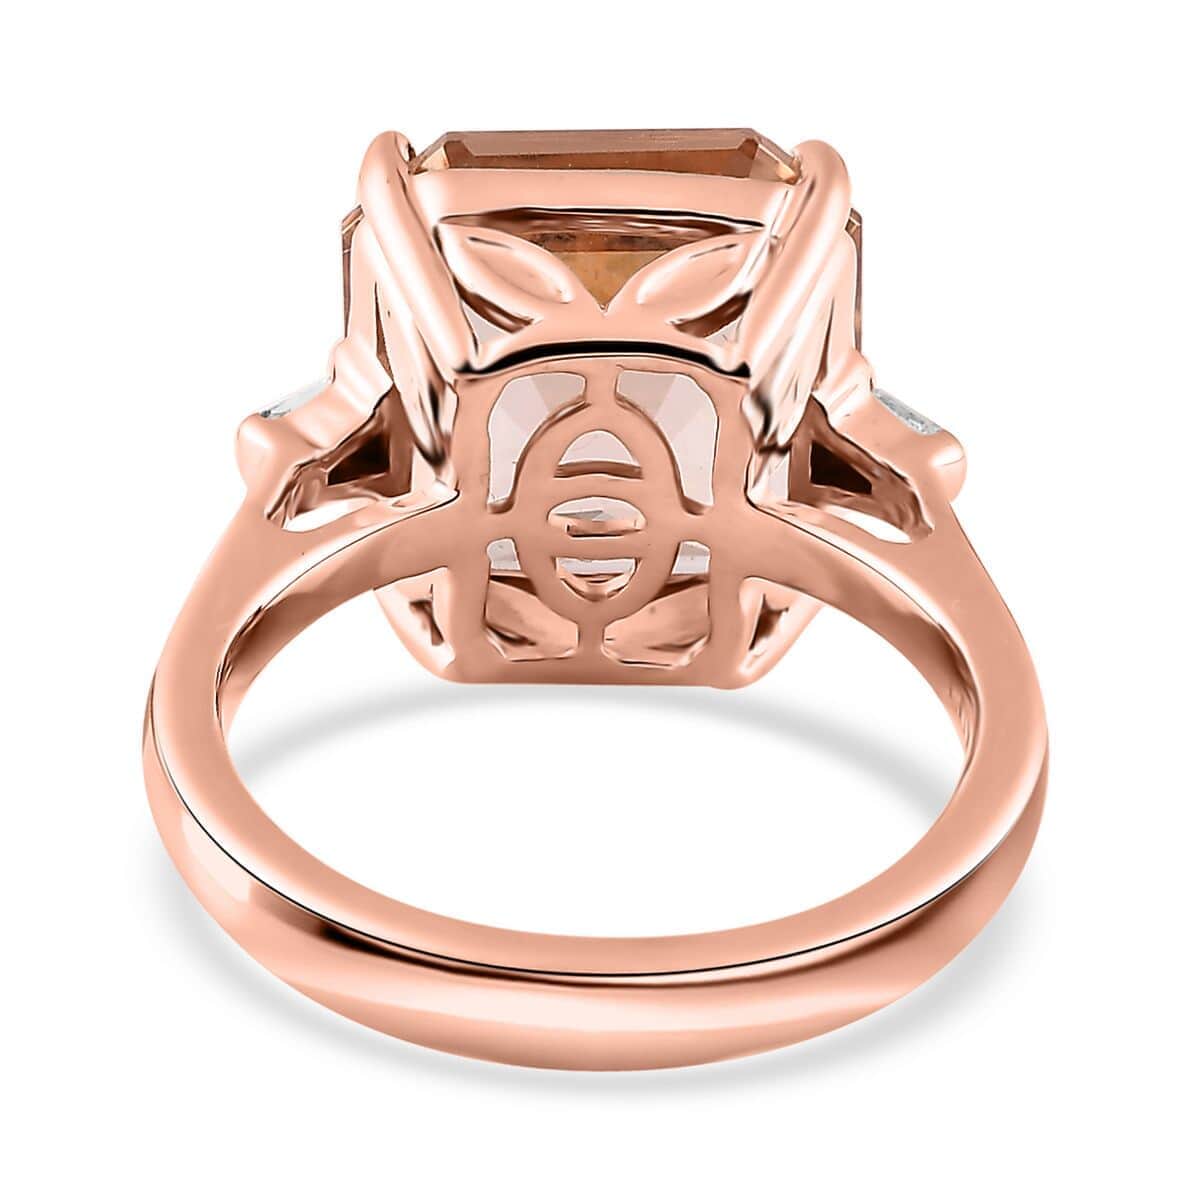 Luxoro Asscher Cut AAA Marropino Morganite and I3 Diamond 6.60 ctw Ring in 14K Rose Gold (Size 10.0) 5.60 Grams image number 4